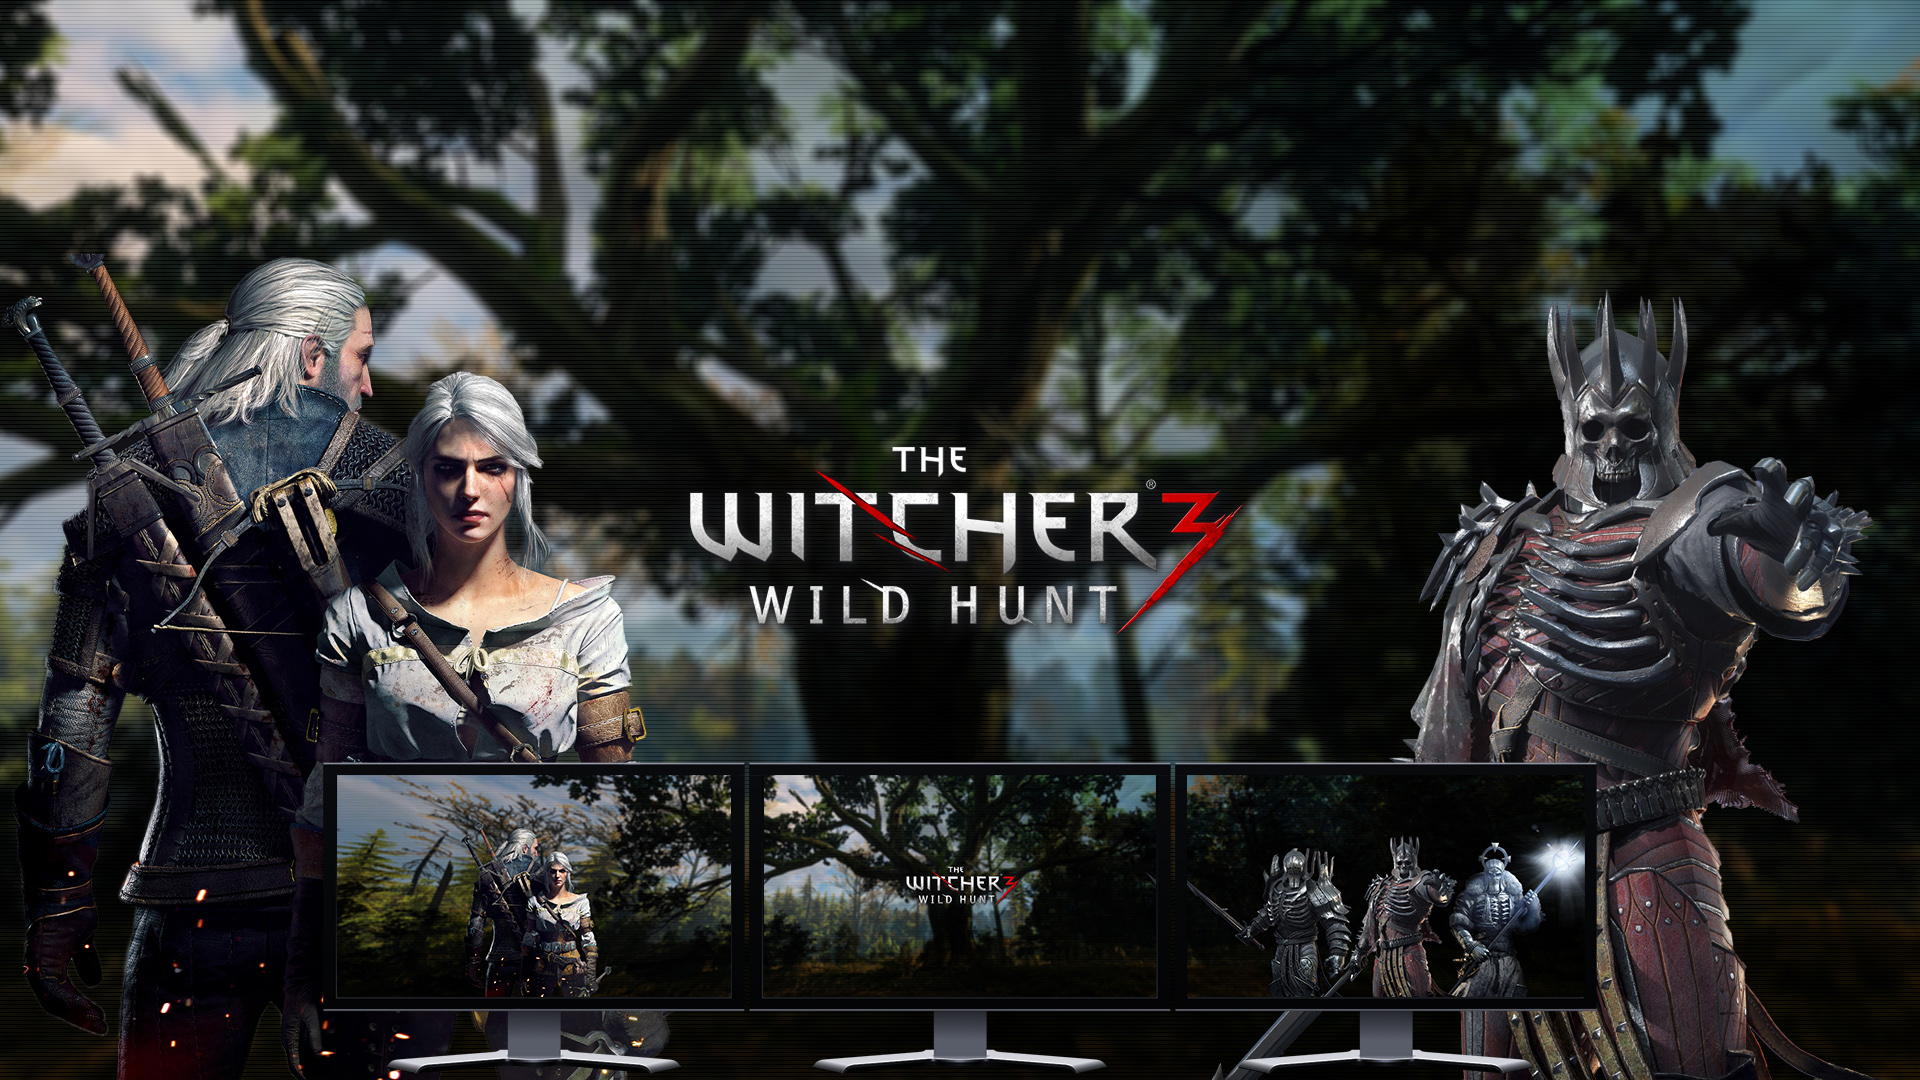 Witcher 3 Wallpapers by foxgguy2001 on DeviantArt